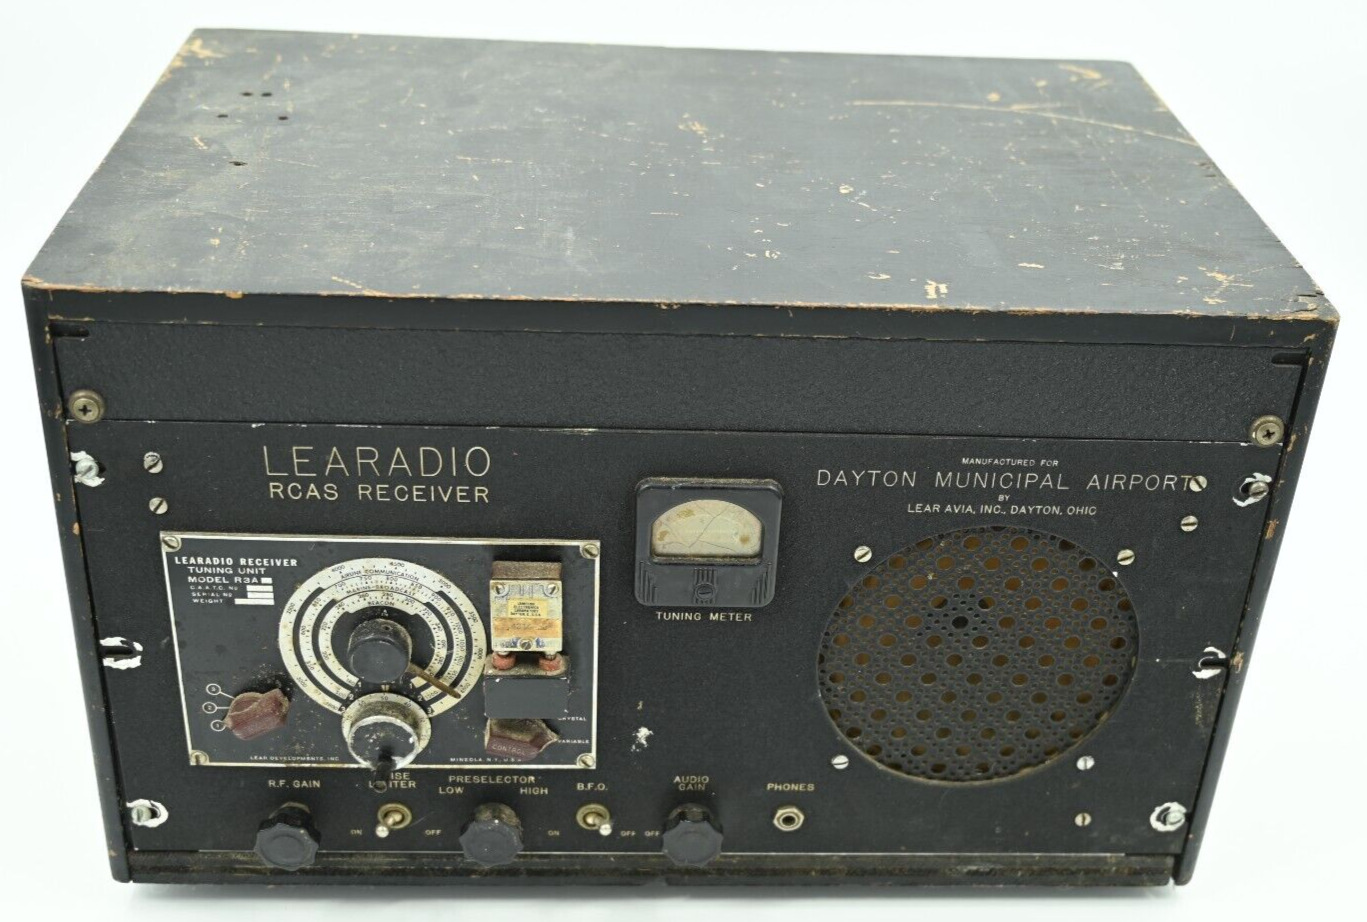 Vintage RARE Learadio RCAS Receiver with R3A Tuner for Dayton Municpal Airport